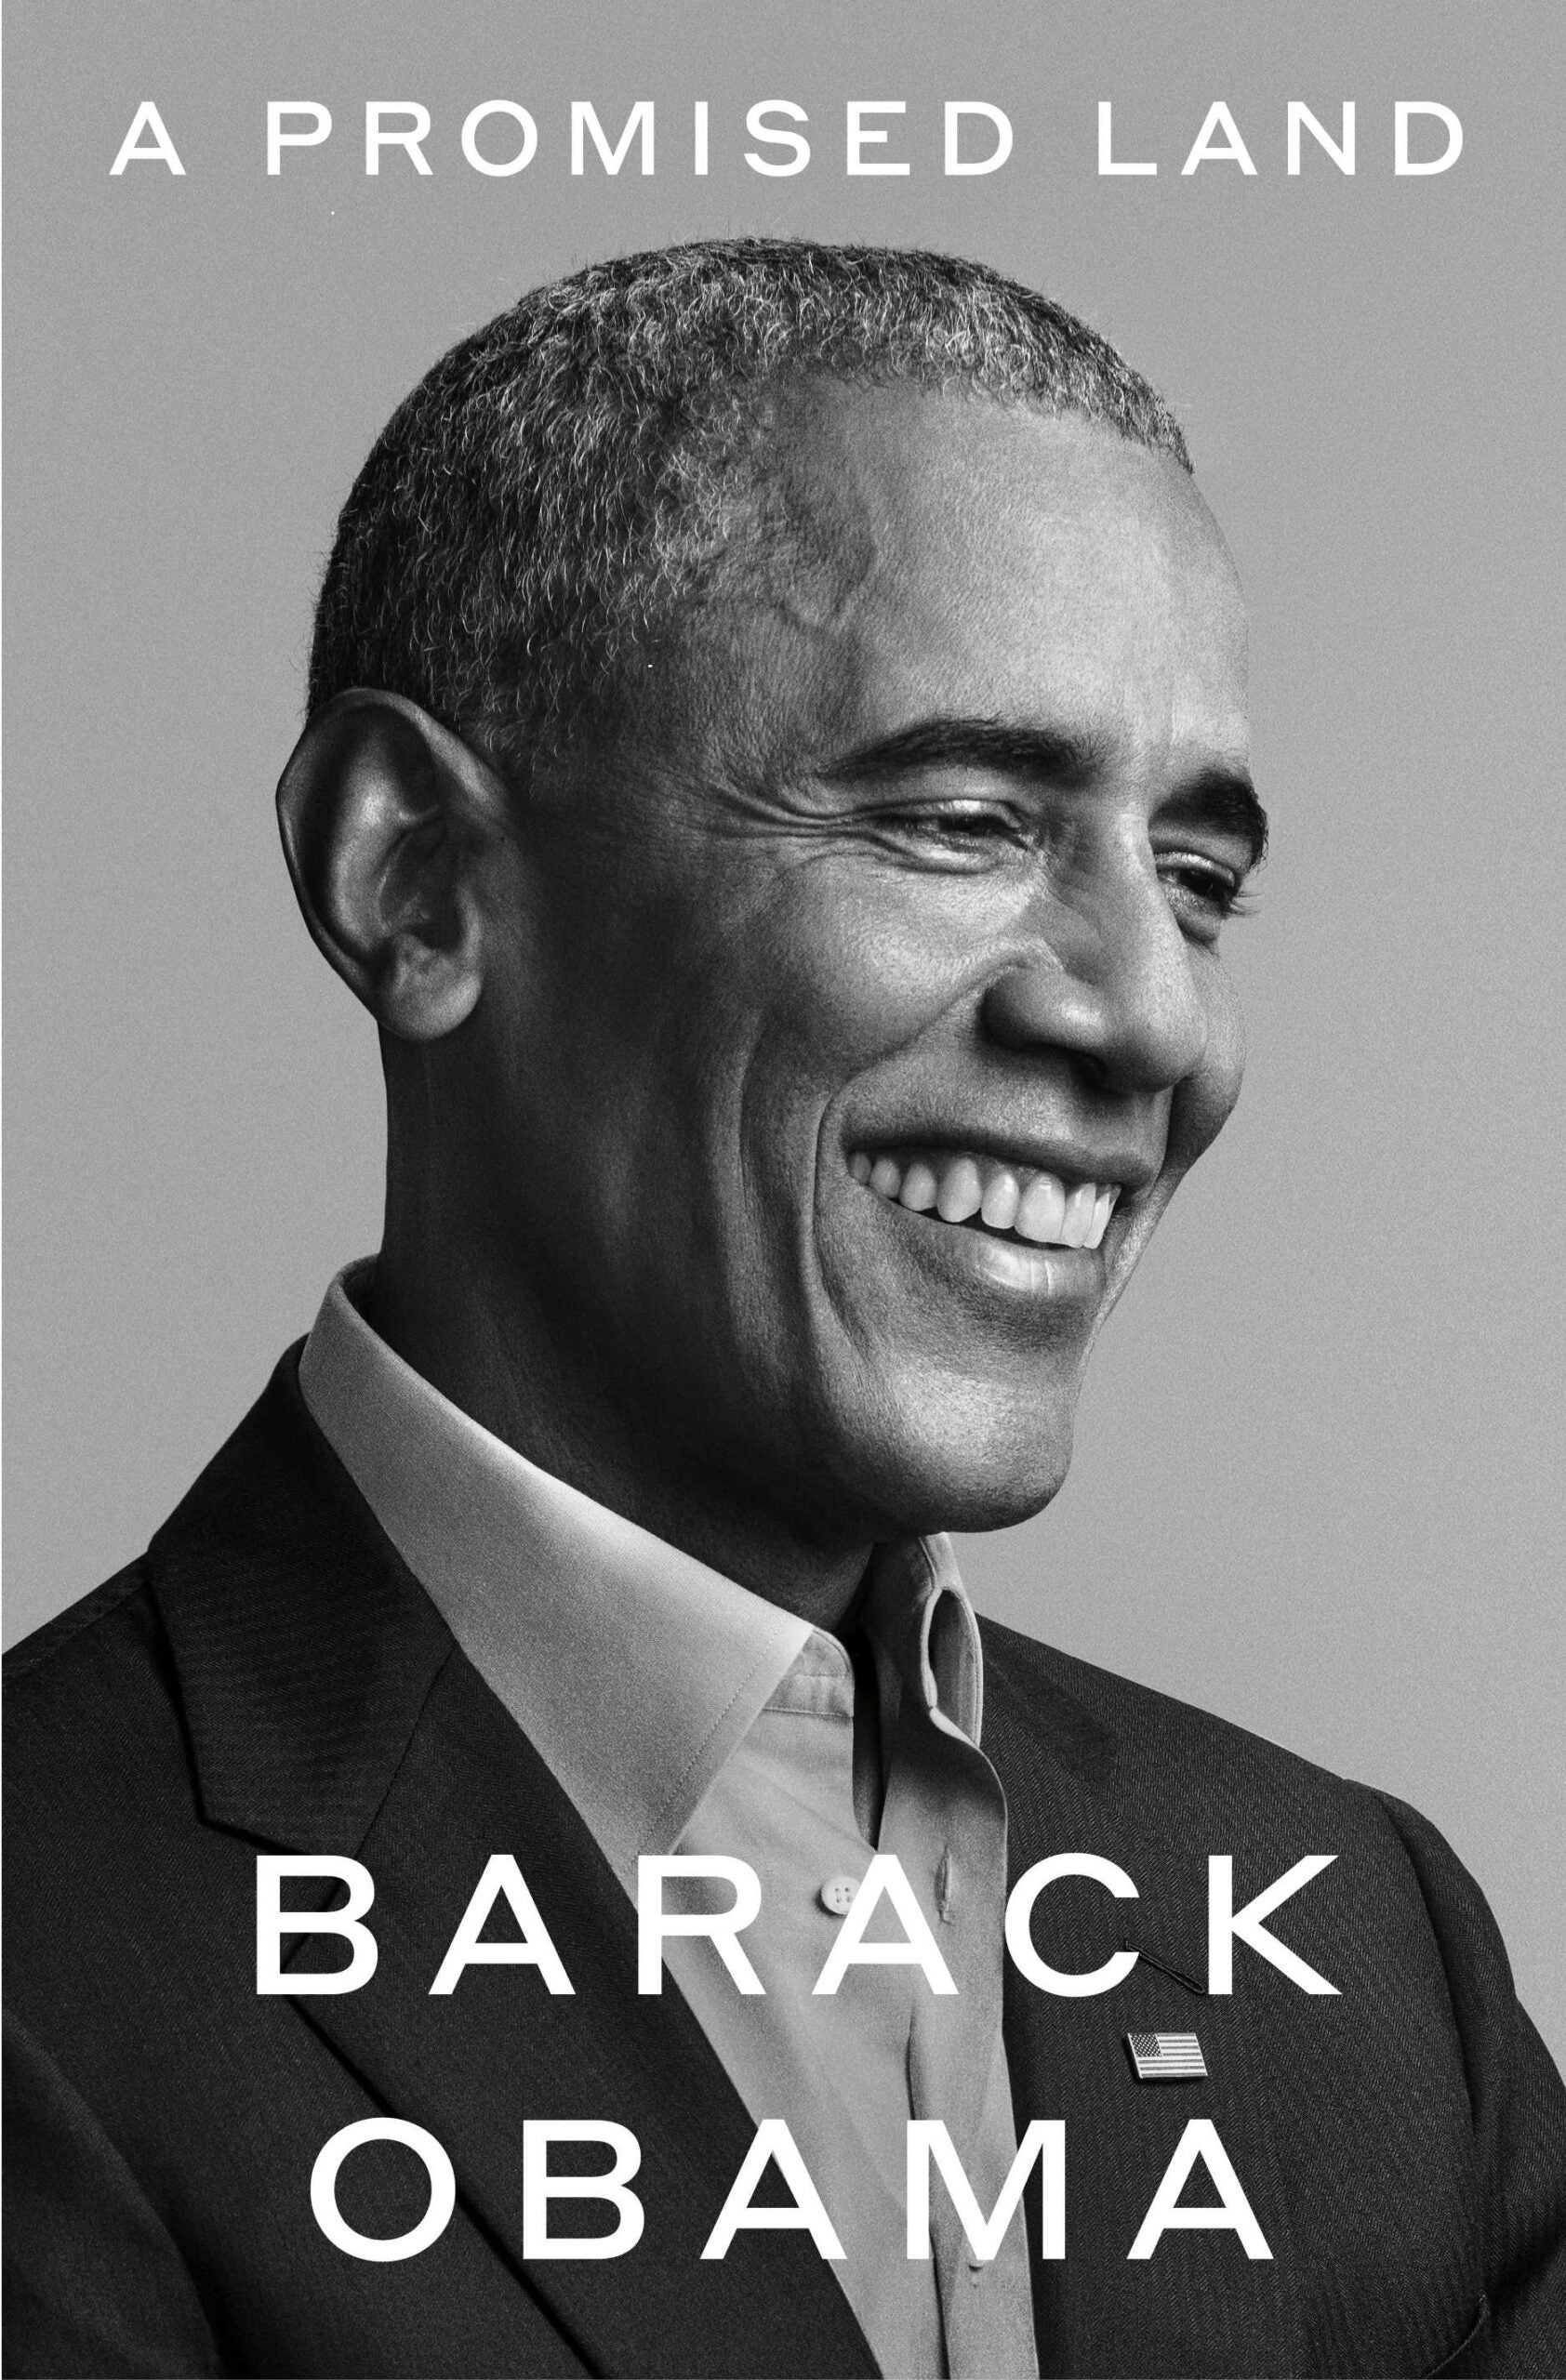 A PROMISED LAND by Barack Obama is Coming November 17, 2020!